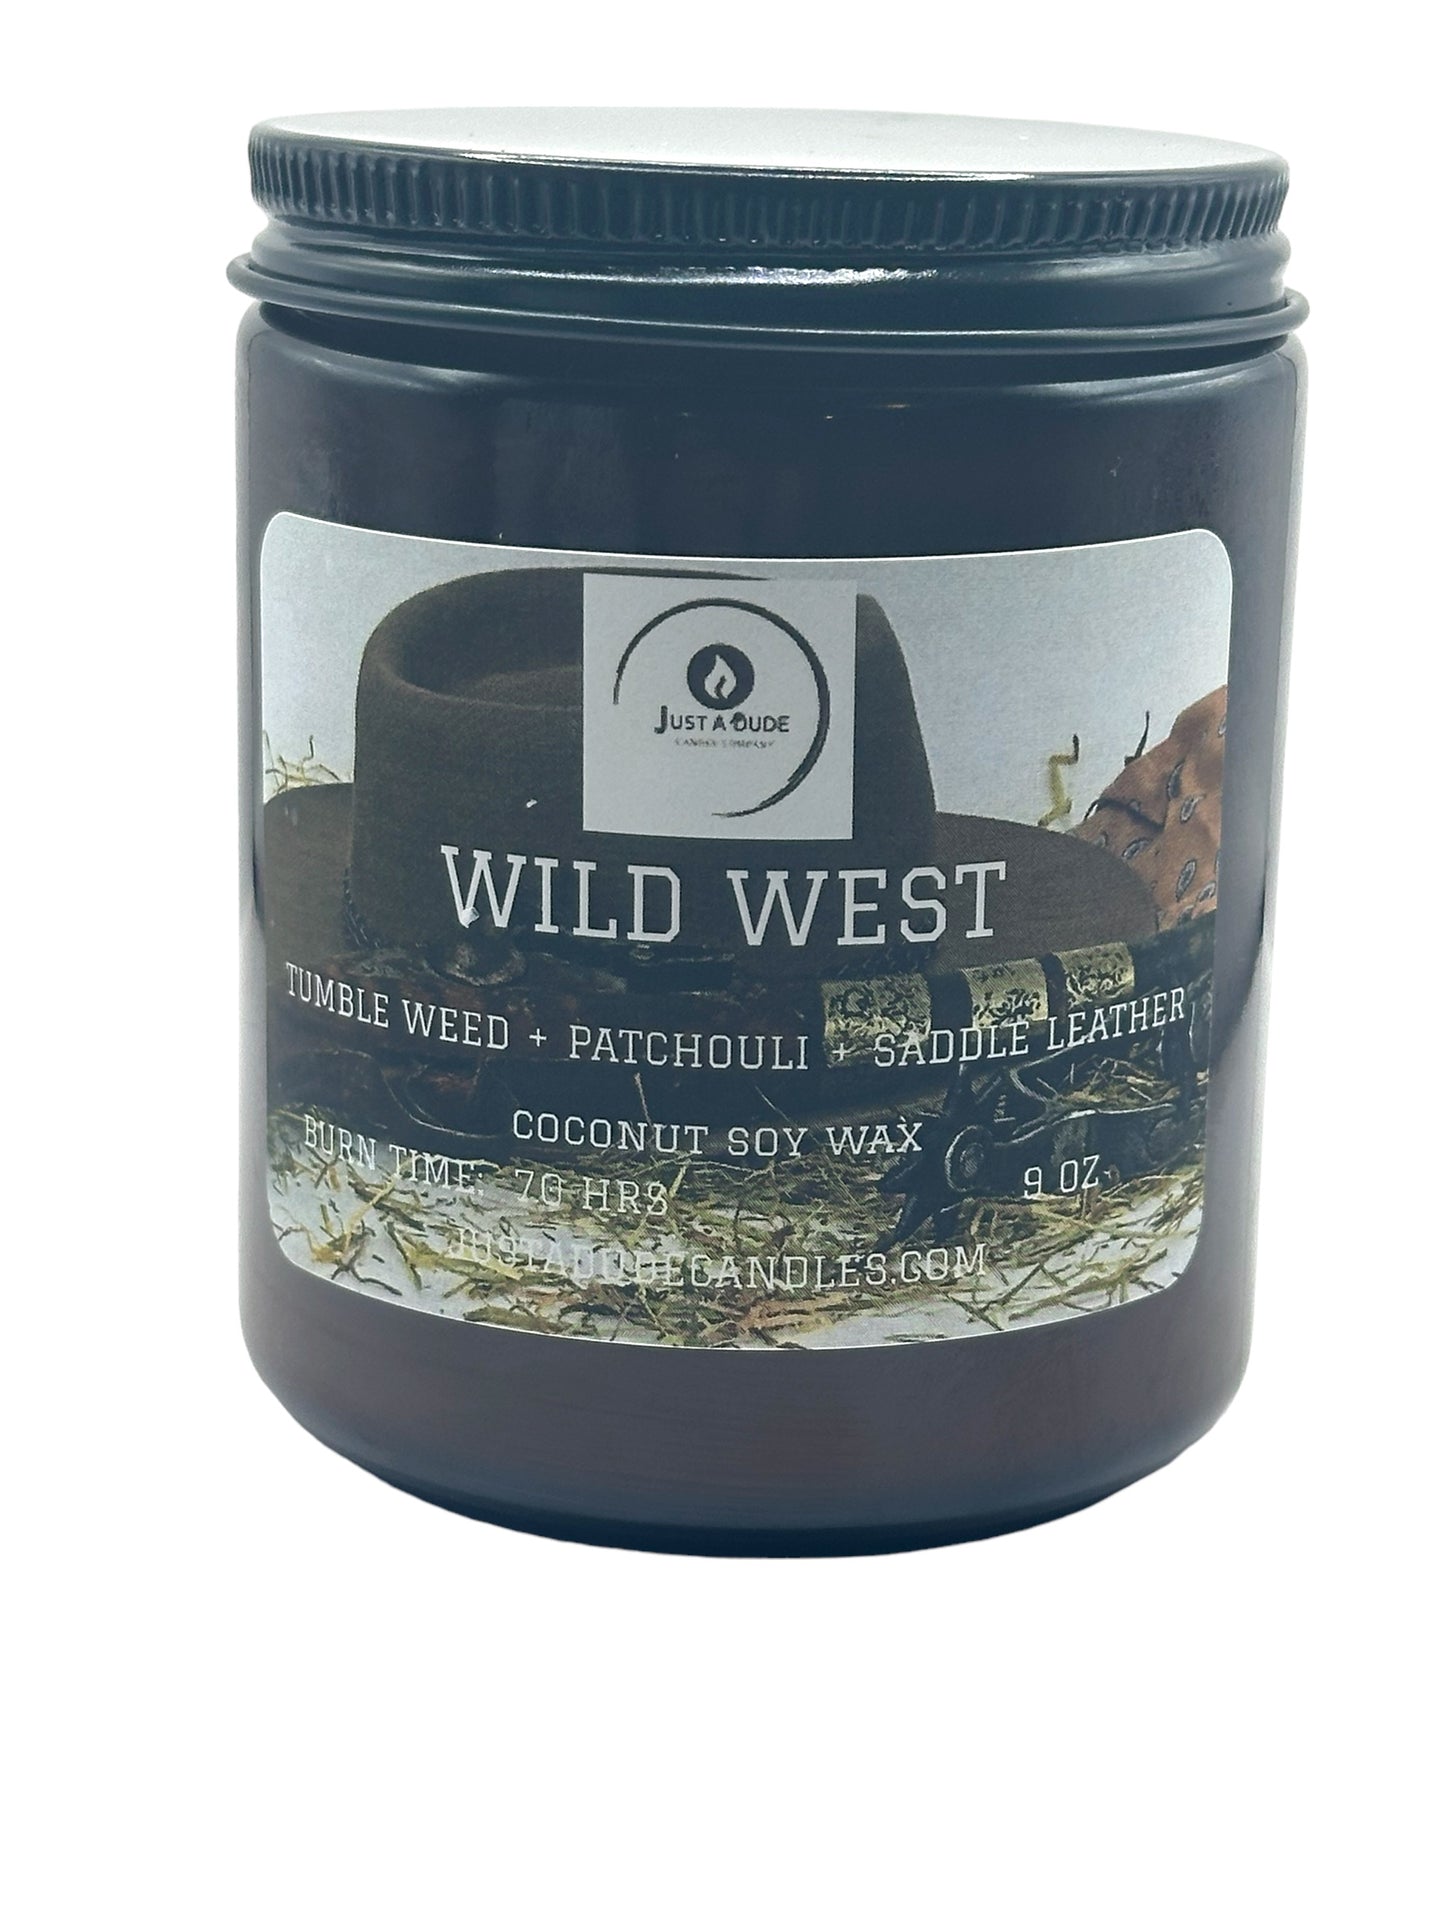 WILD WEST (TUMBLE WEED + PATCHOULI + LEATHER) AMBER JAR COLLECTION